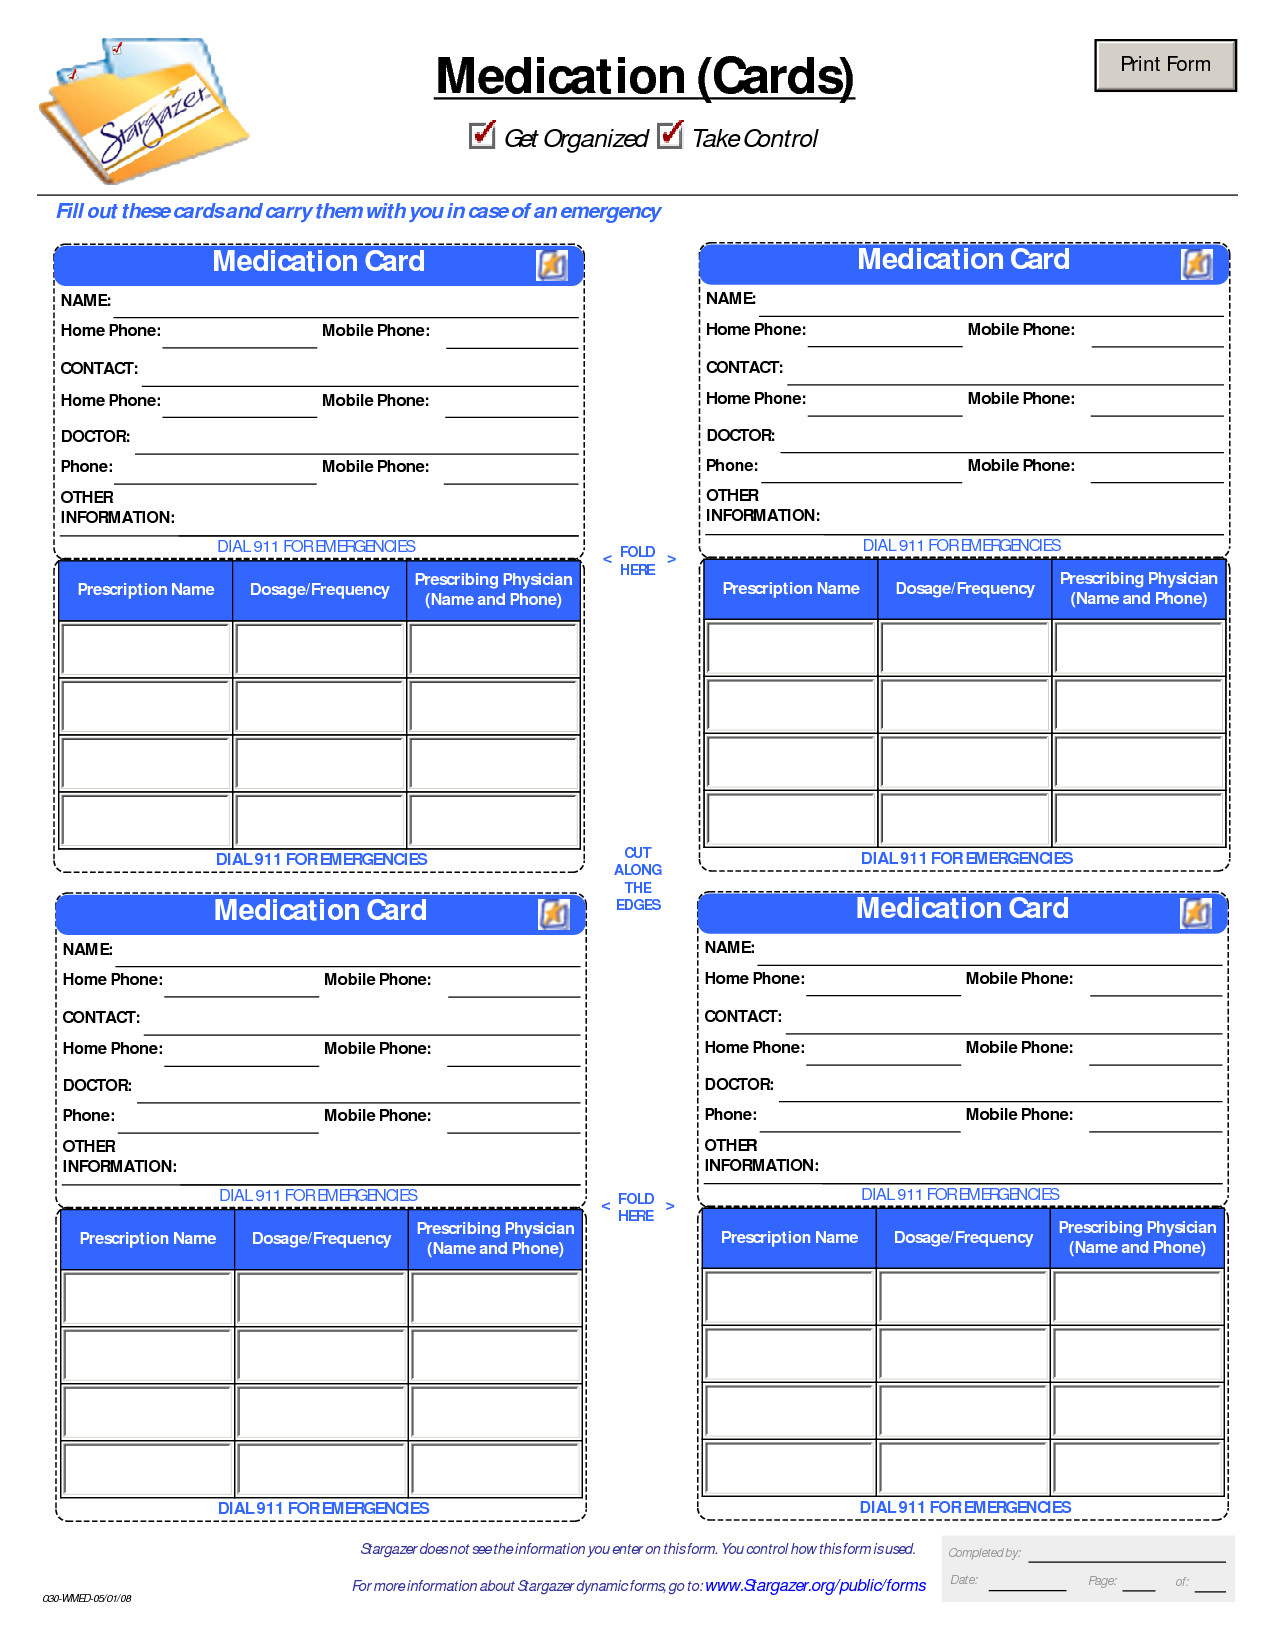 Patient Medication Card Template